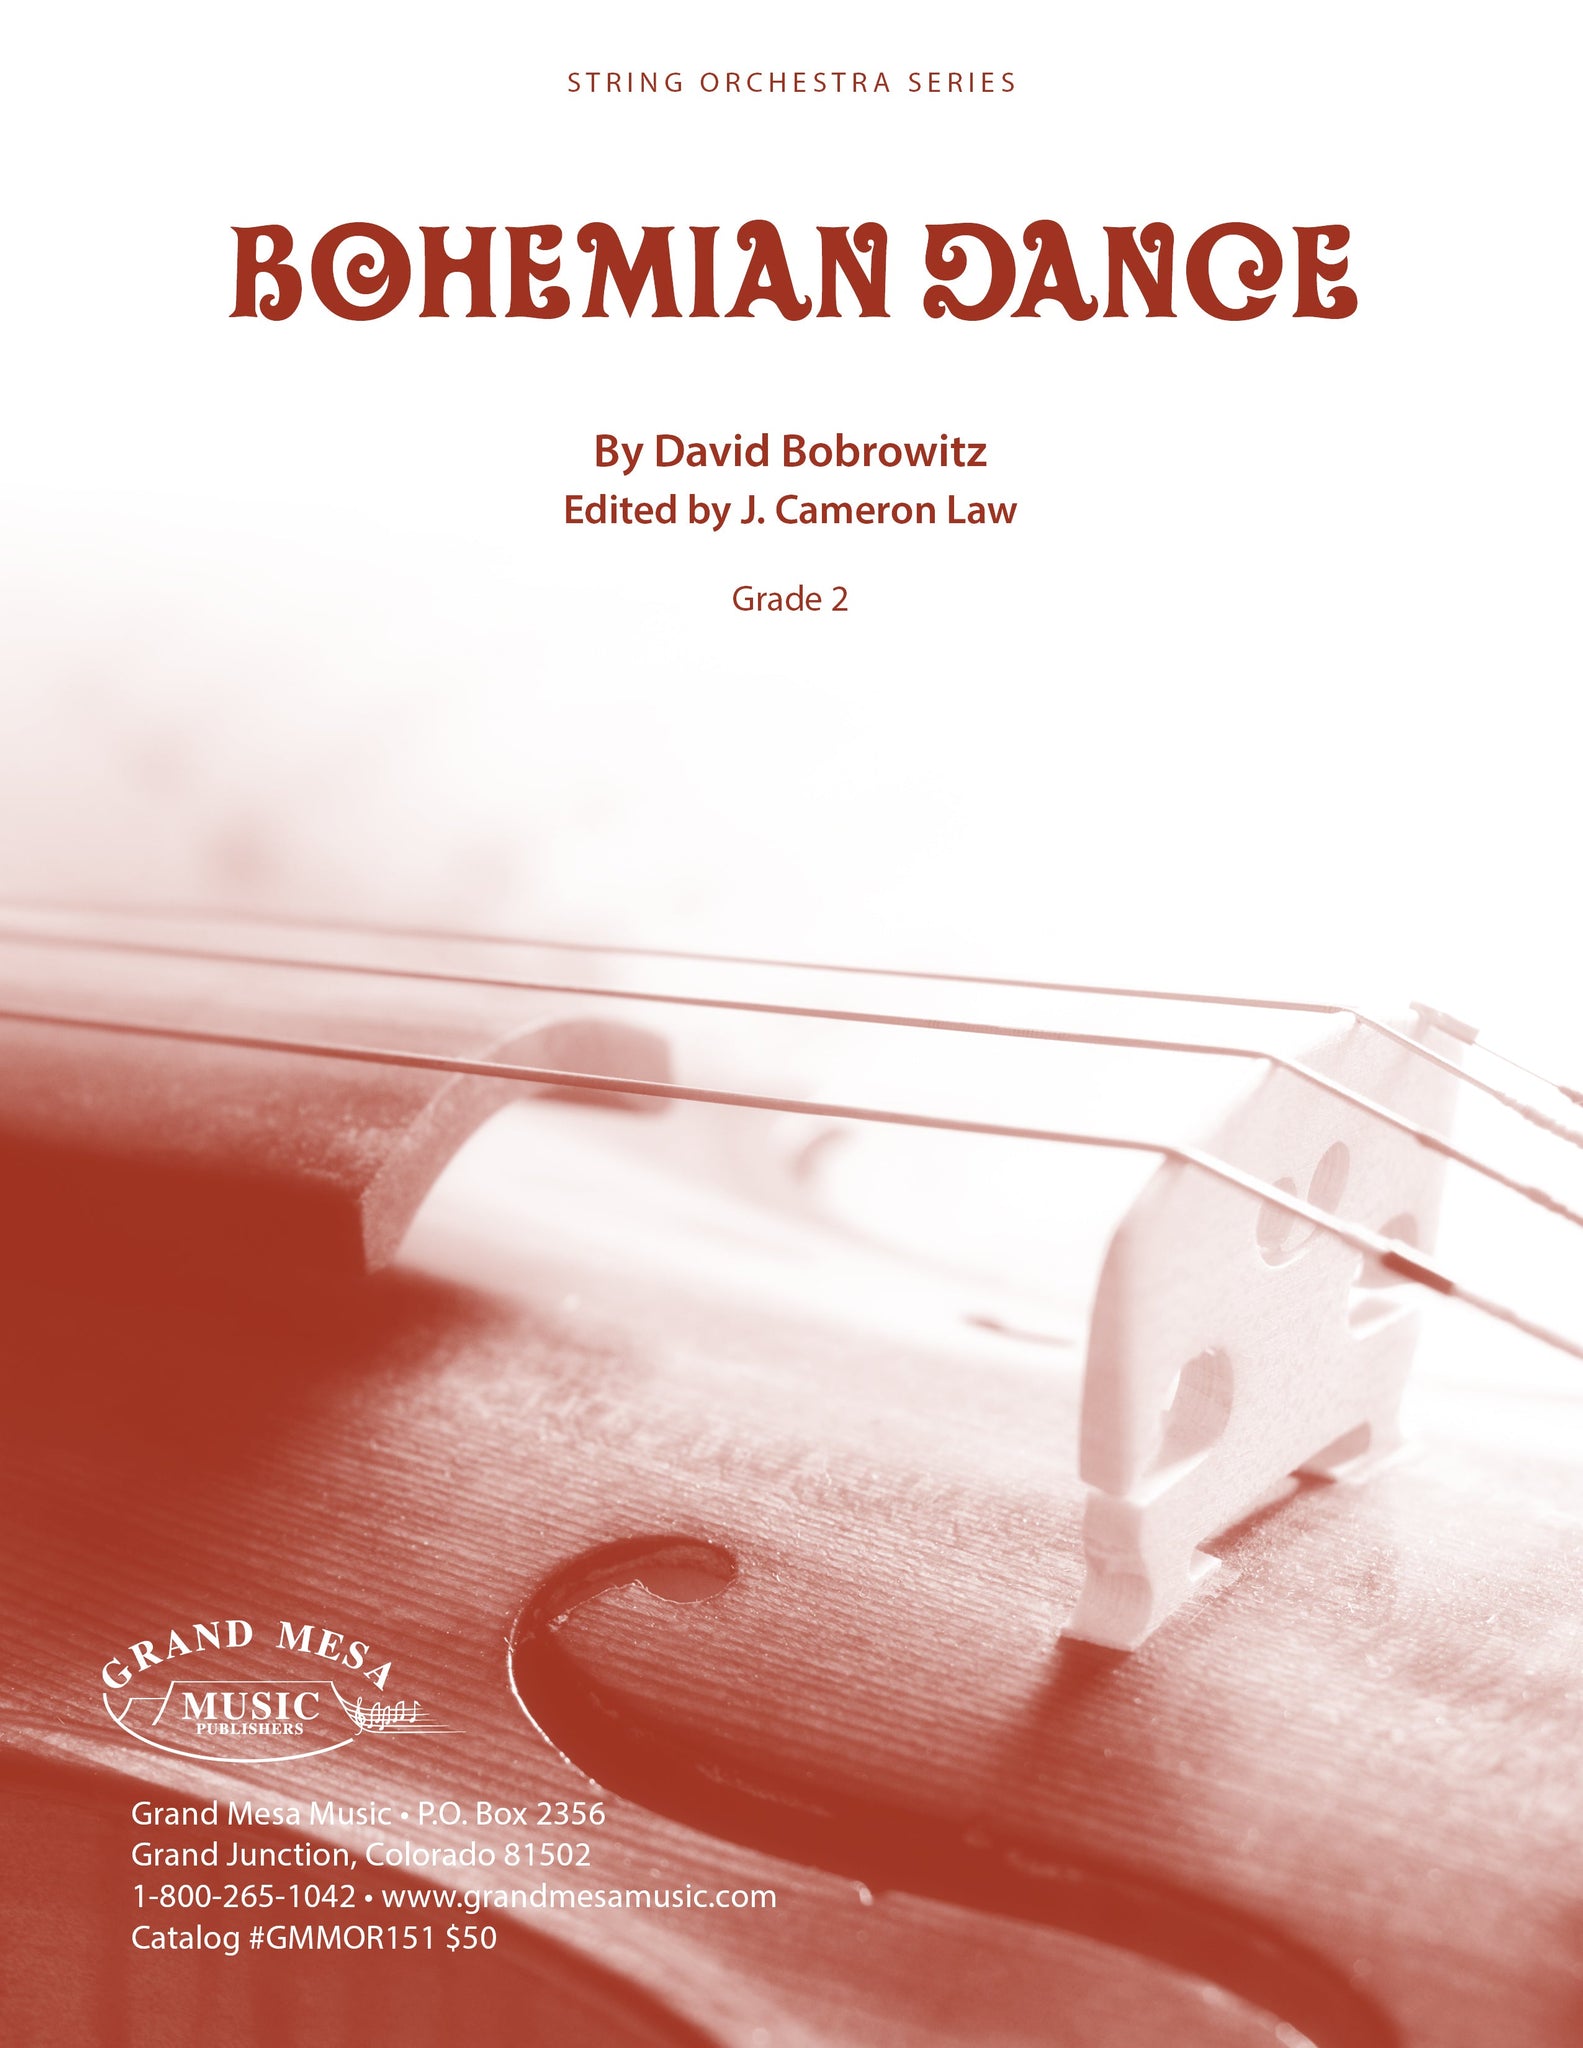 Strings sheet music cover of Bohemian Dance, composed by David Bobrowitz.